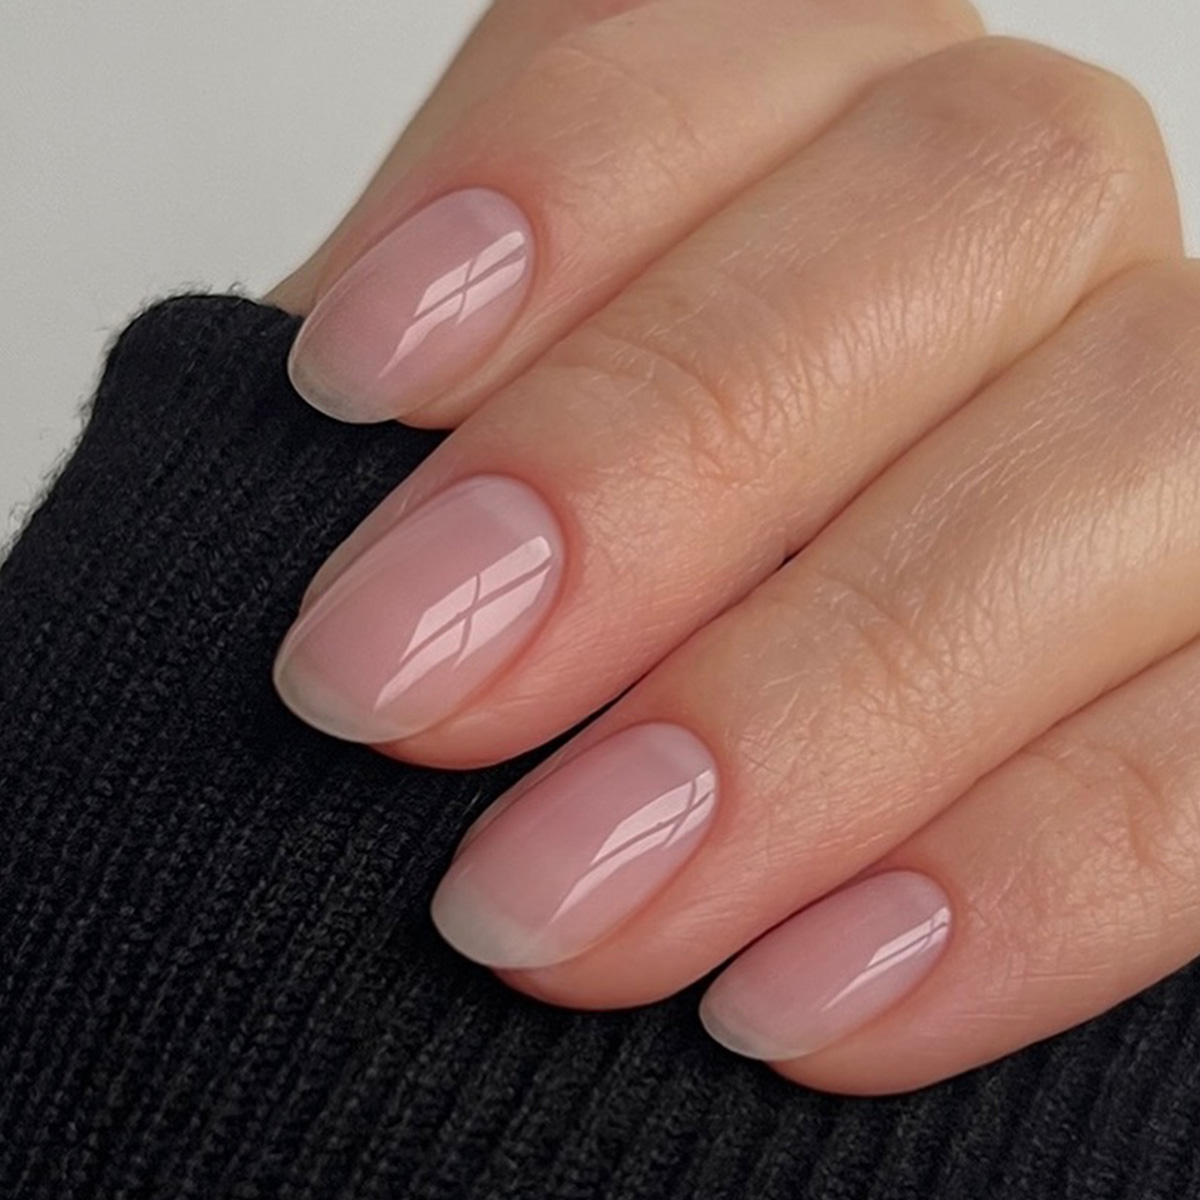 Adding This Simple Step Into My Nail Routine Made My Manicures Look Salon Grade